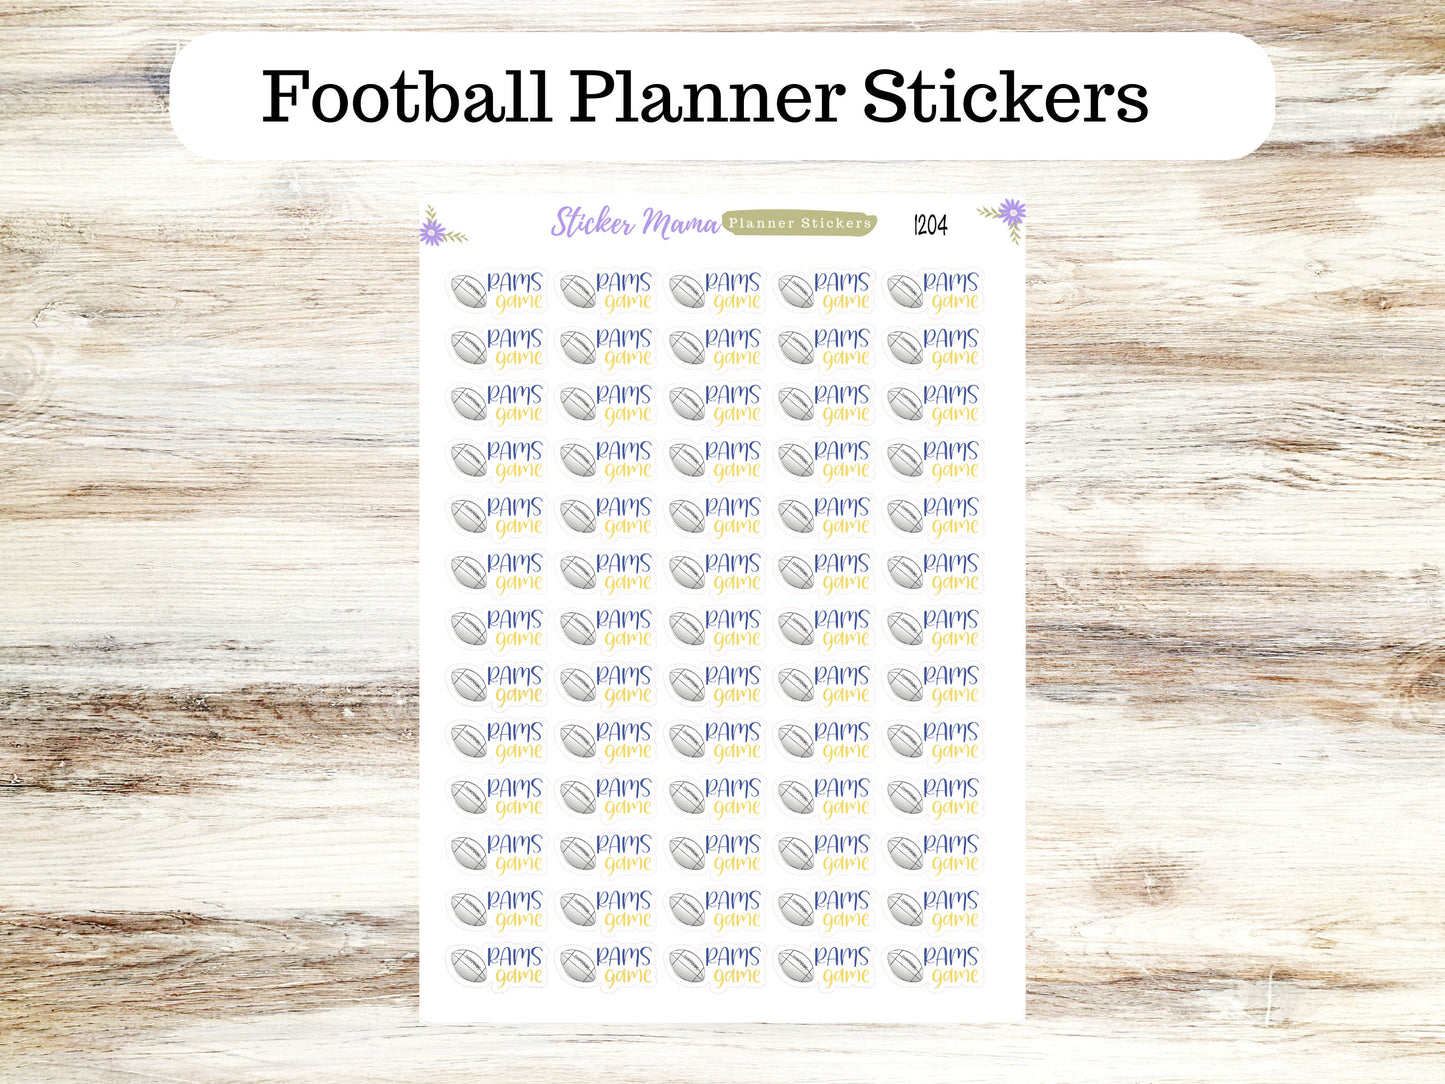 1204 CUSTOM NFL GAME Day Stickers || Football Planner Stickers || Football Sports Stickers || Football Games || Football Practice